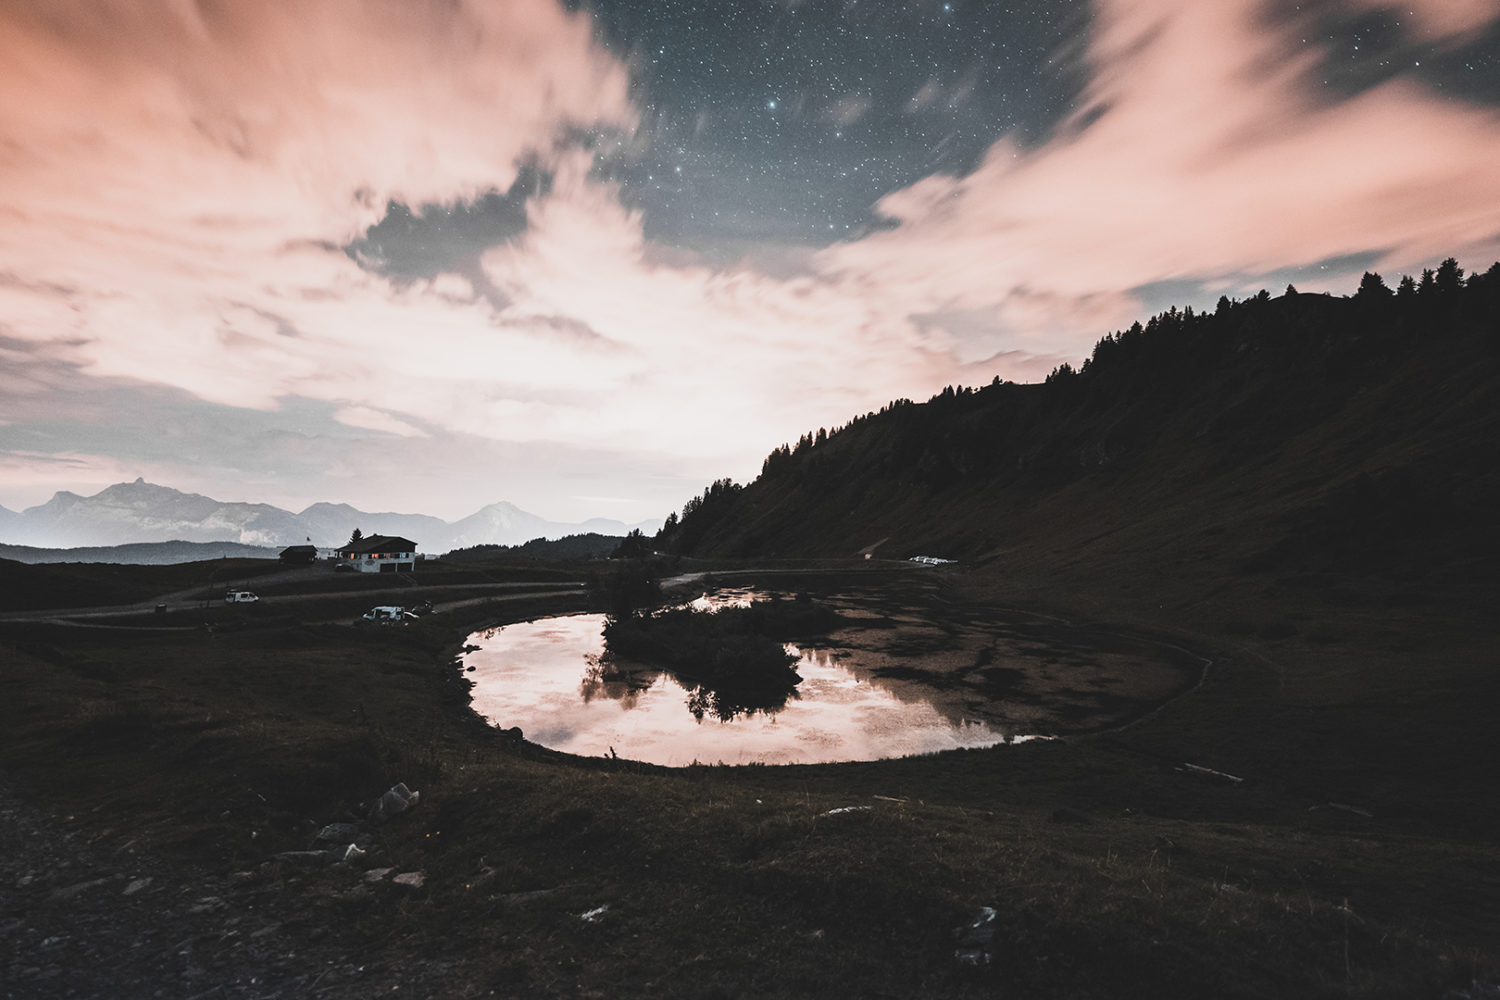 How to shoot a starry nightscape in the French Alps (or your backyard)